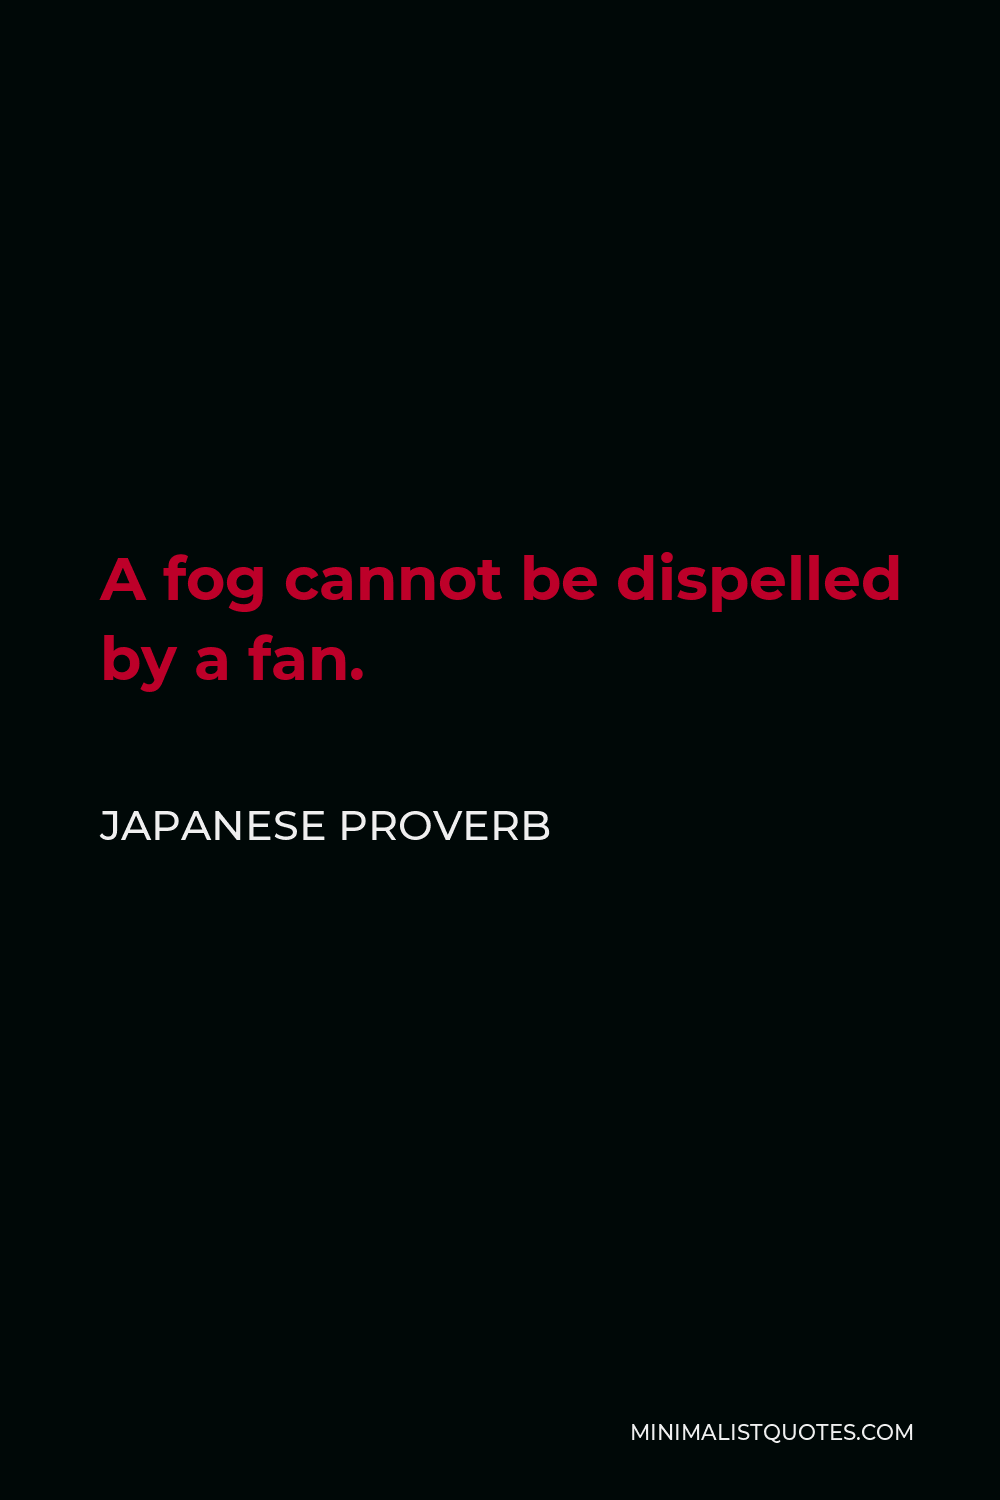 Japanese Proverb Quote - A fog cannot be dispelled by a fan.